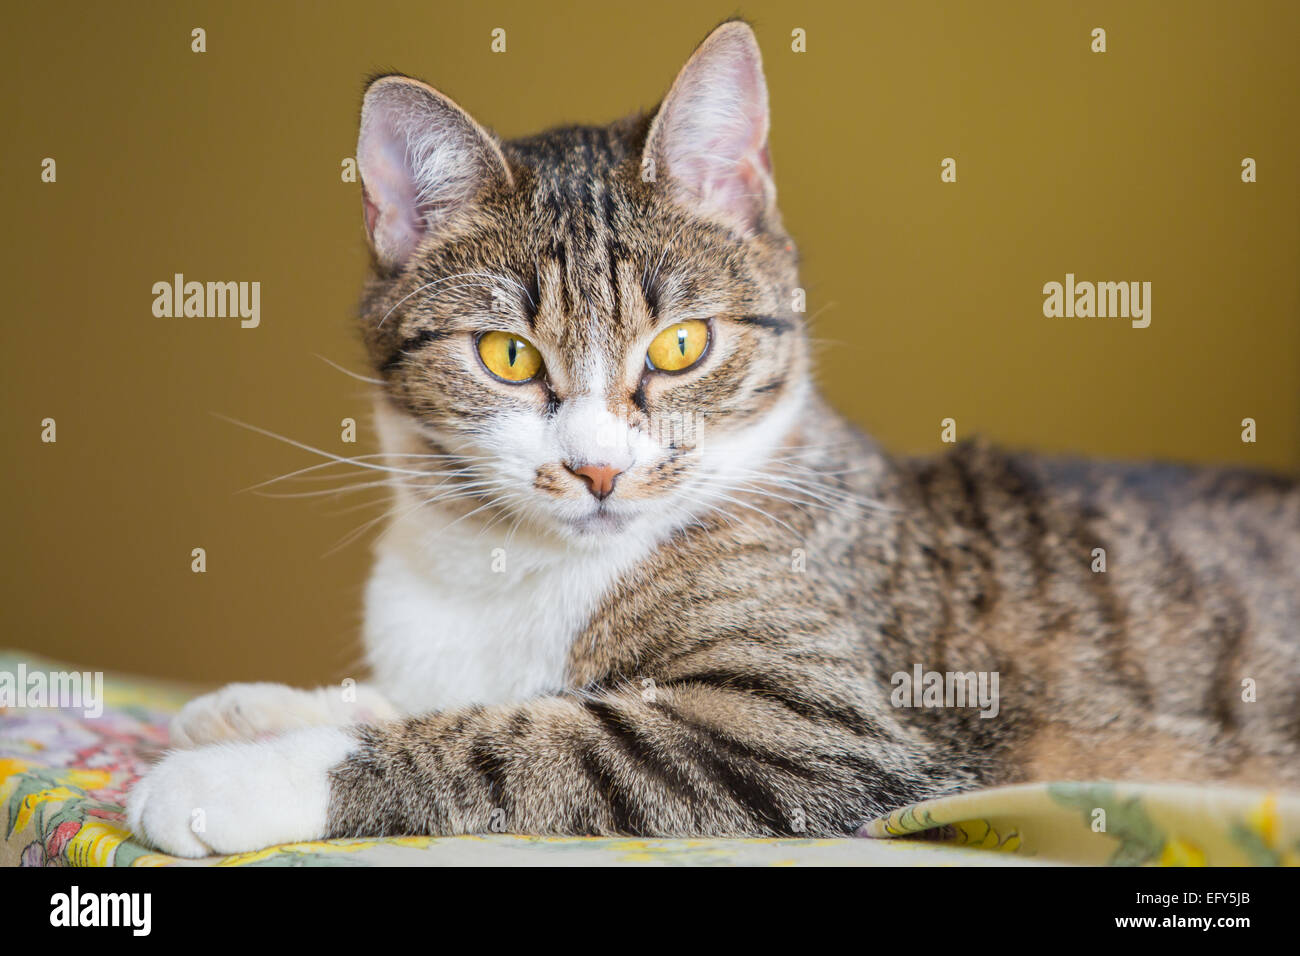 close up of lying tabby cat with green eyes Stock Photo